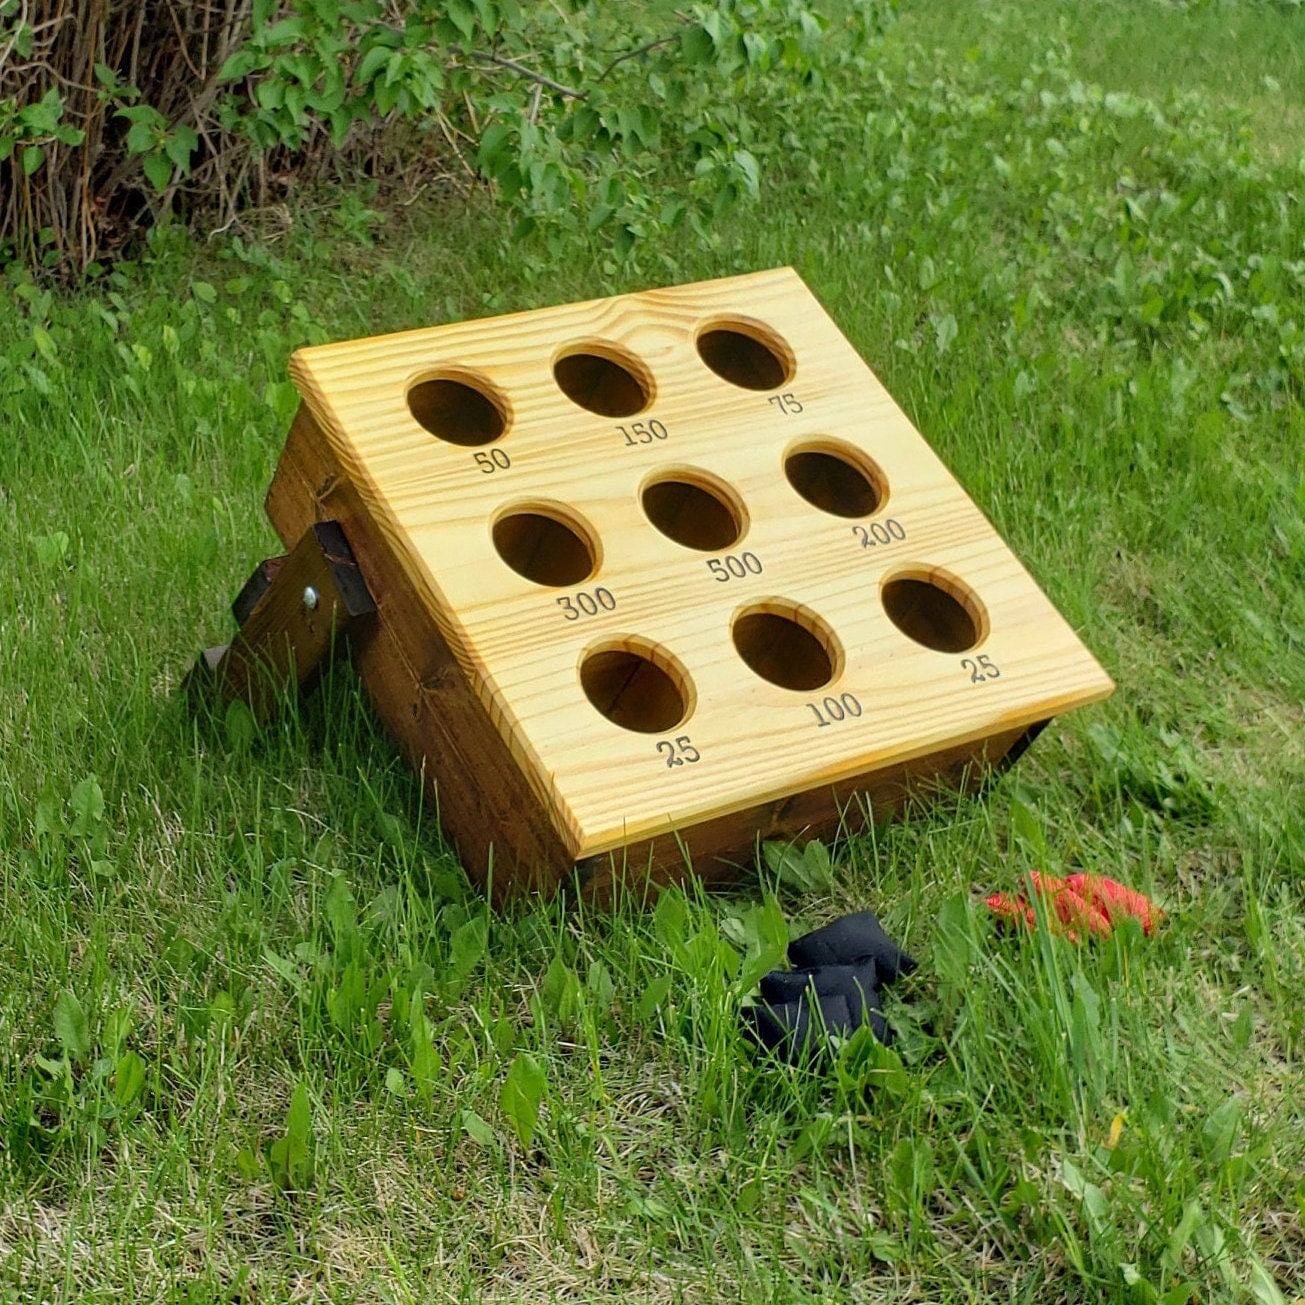 Two Bean Bag Toss Lawn Games Mini Corn Hole Game Wooden Yard - Etsy